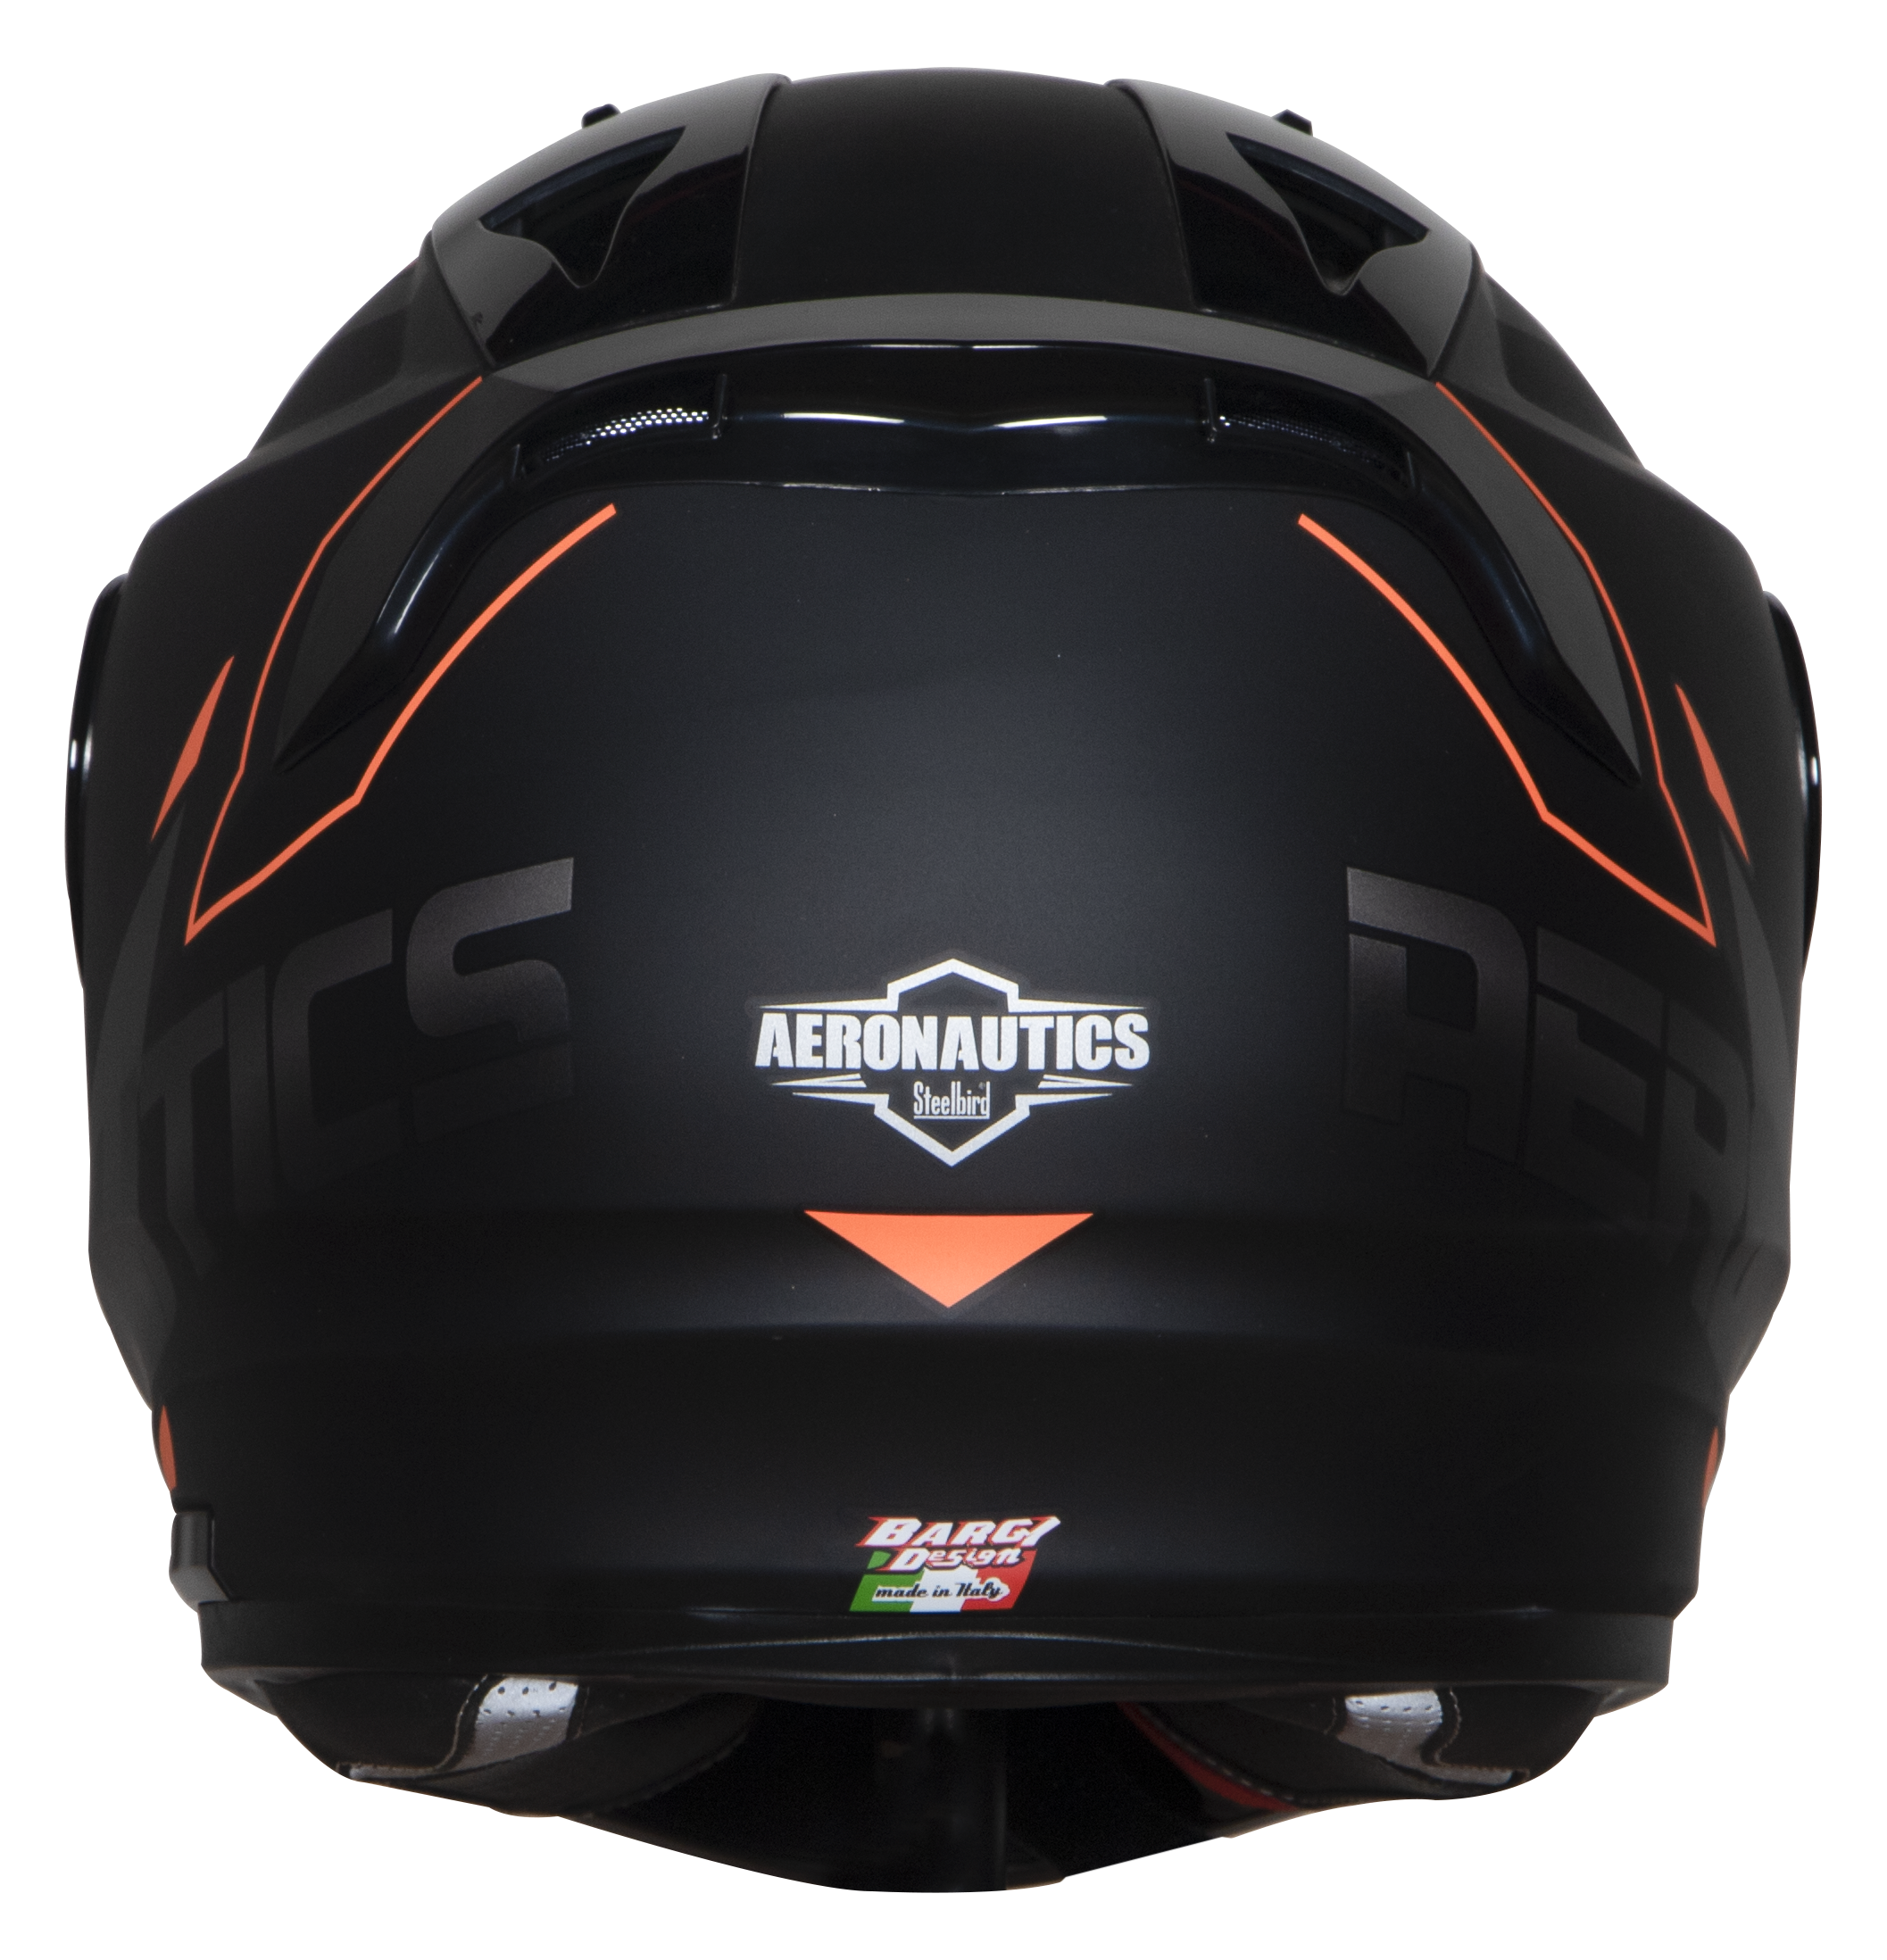 SA-1 RTW Mat Black/Orange With Anti-Fog Shield Silver Chrome Visor (Fitted With Clear Visor Extra Silver Chrome Anti-Fog Shield Visor Free)